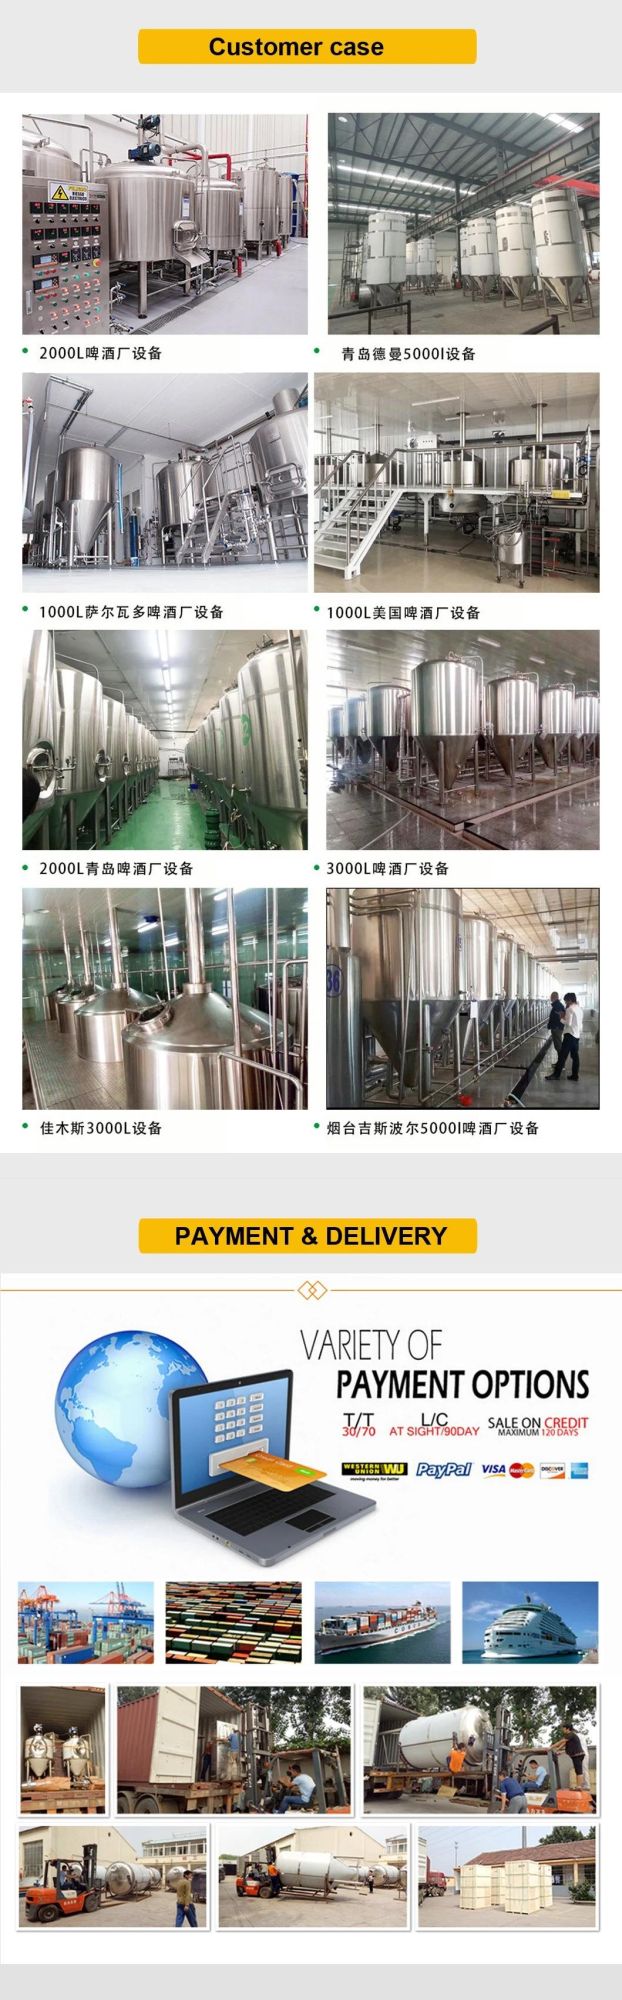 Steam Heating Insulated Stainless Steel Storage Tanks for Water Beer Brewing 100L 200L 5hl 6hl 150gallons 200gallons